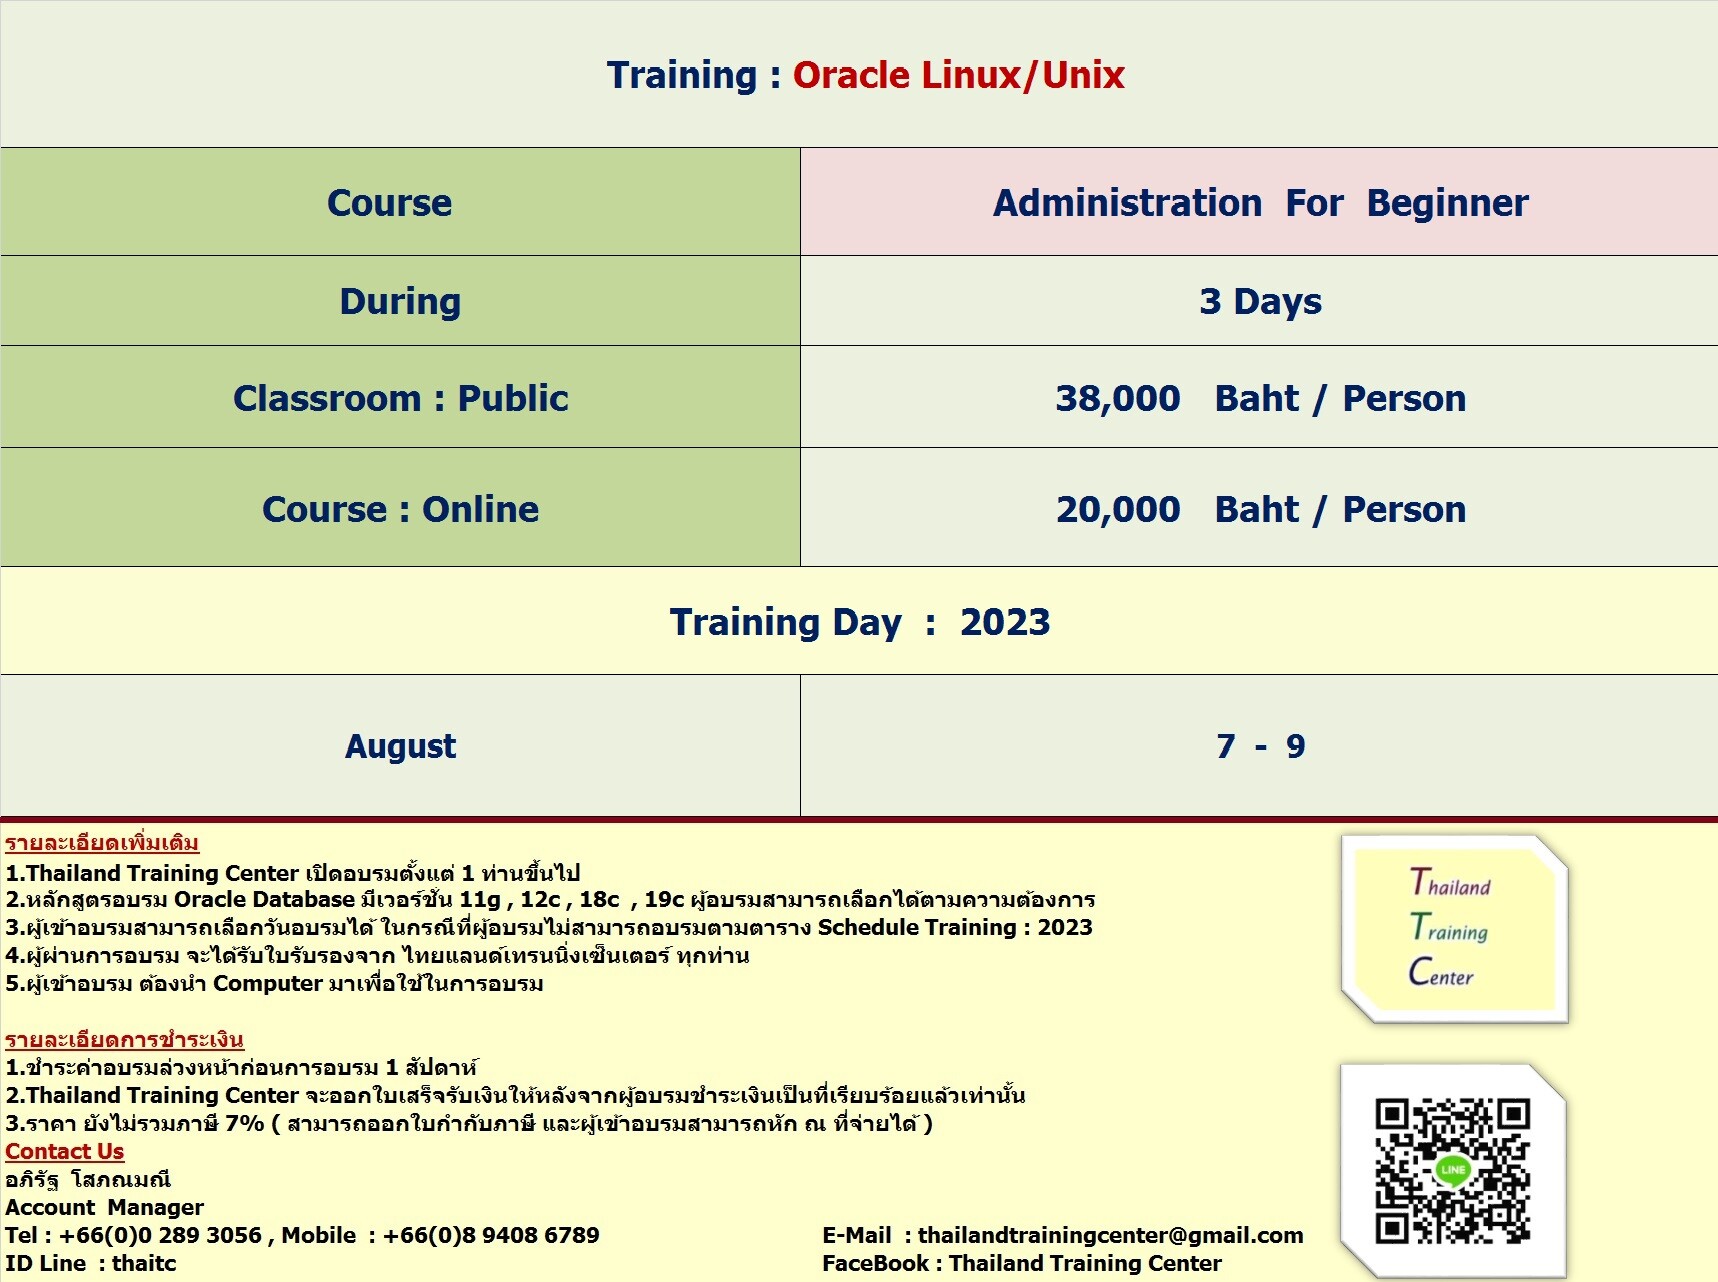 Thailand Training Center เปิดอบรมหลักสูตร Oracle : Linux/Unix Administrator For Beginner